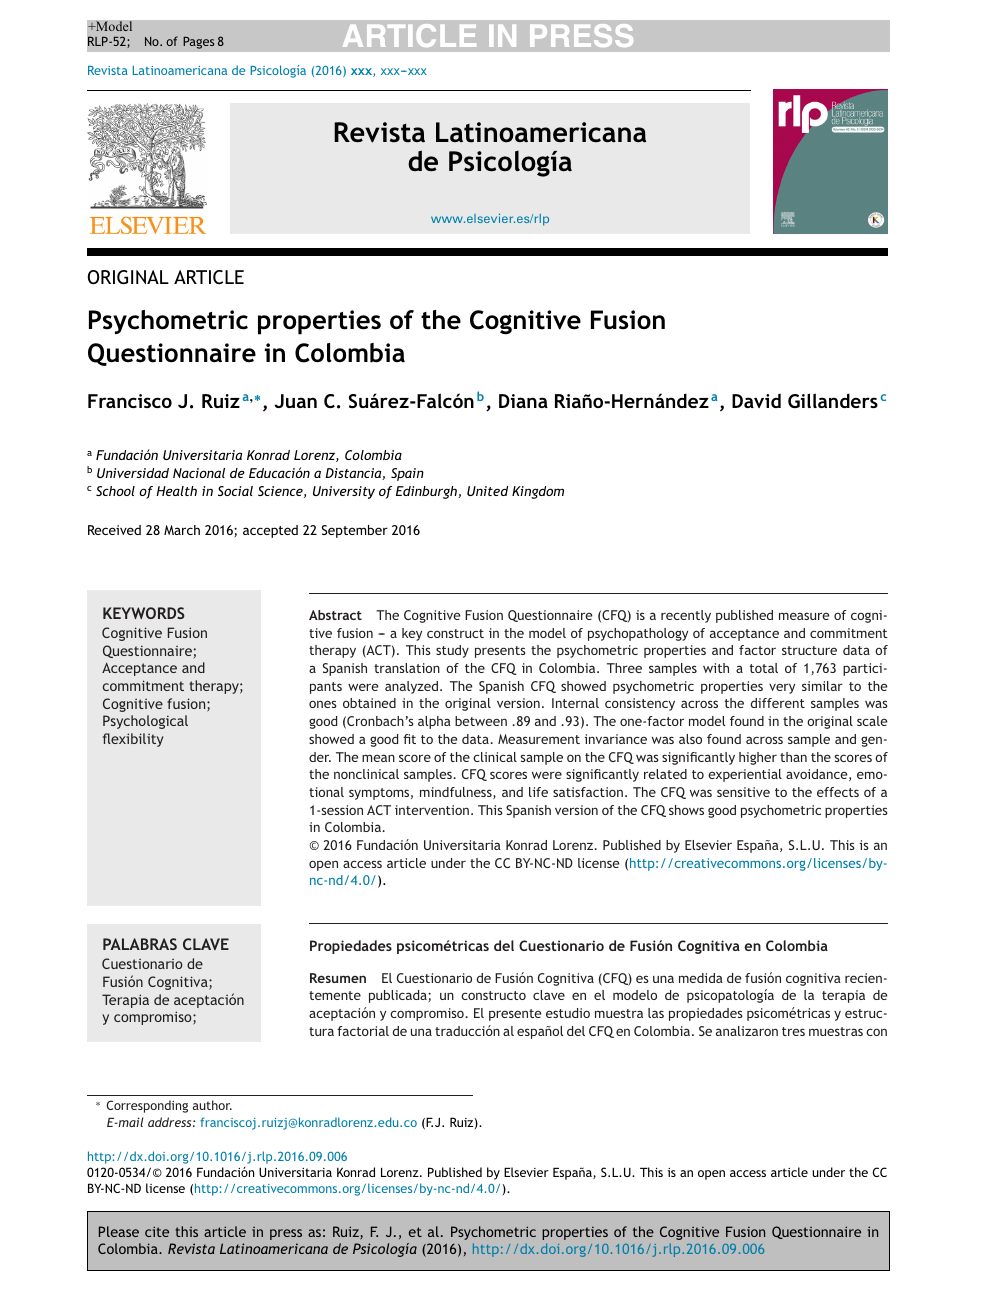 Psychometric Properties Of The Cognitive Fusion Questionnaire In Colombia Topic Of Research Paper In Psychology Download Scholarly Article Pdf And Read For Free On Cyberleninka Open Science Hub